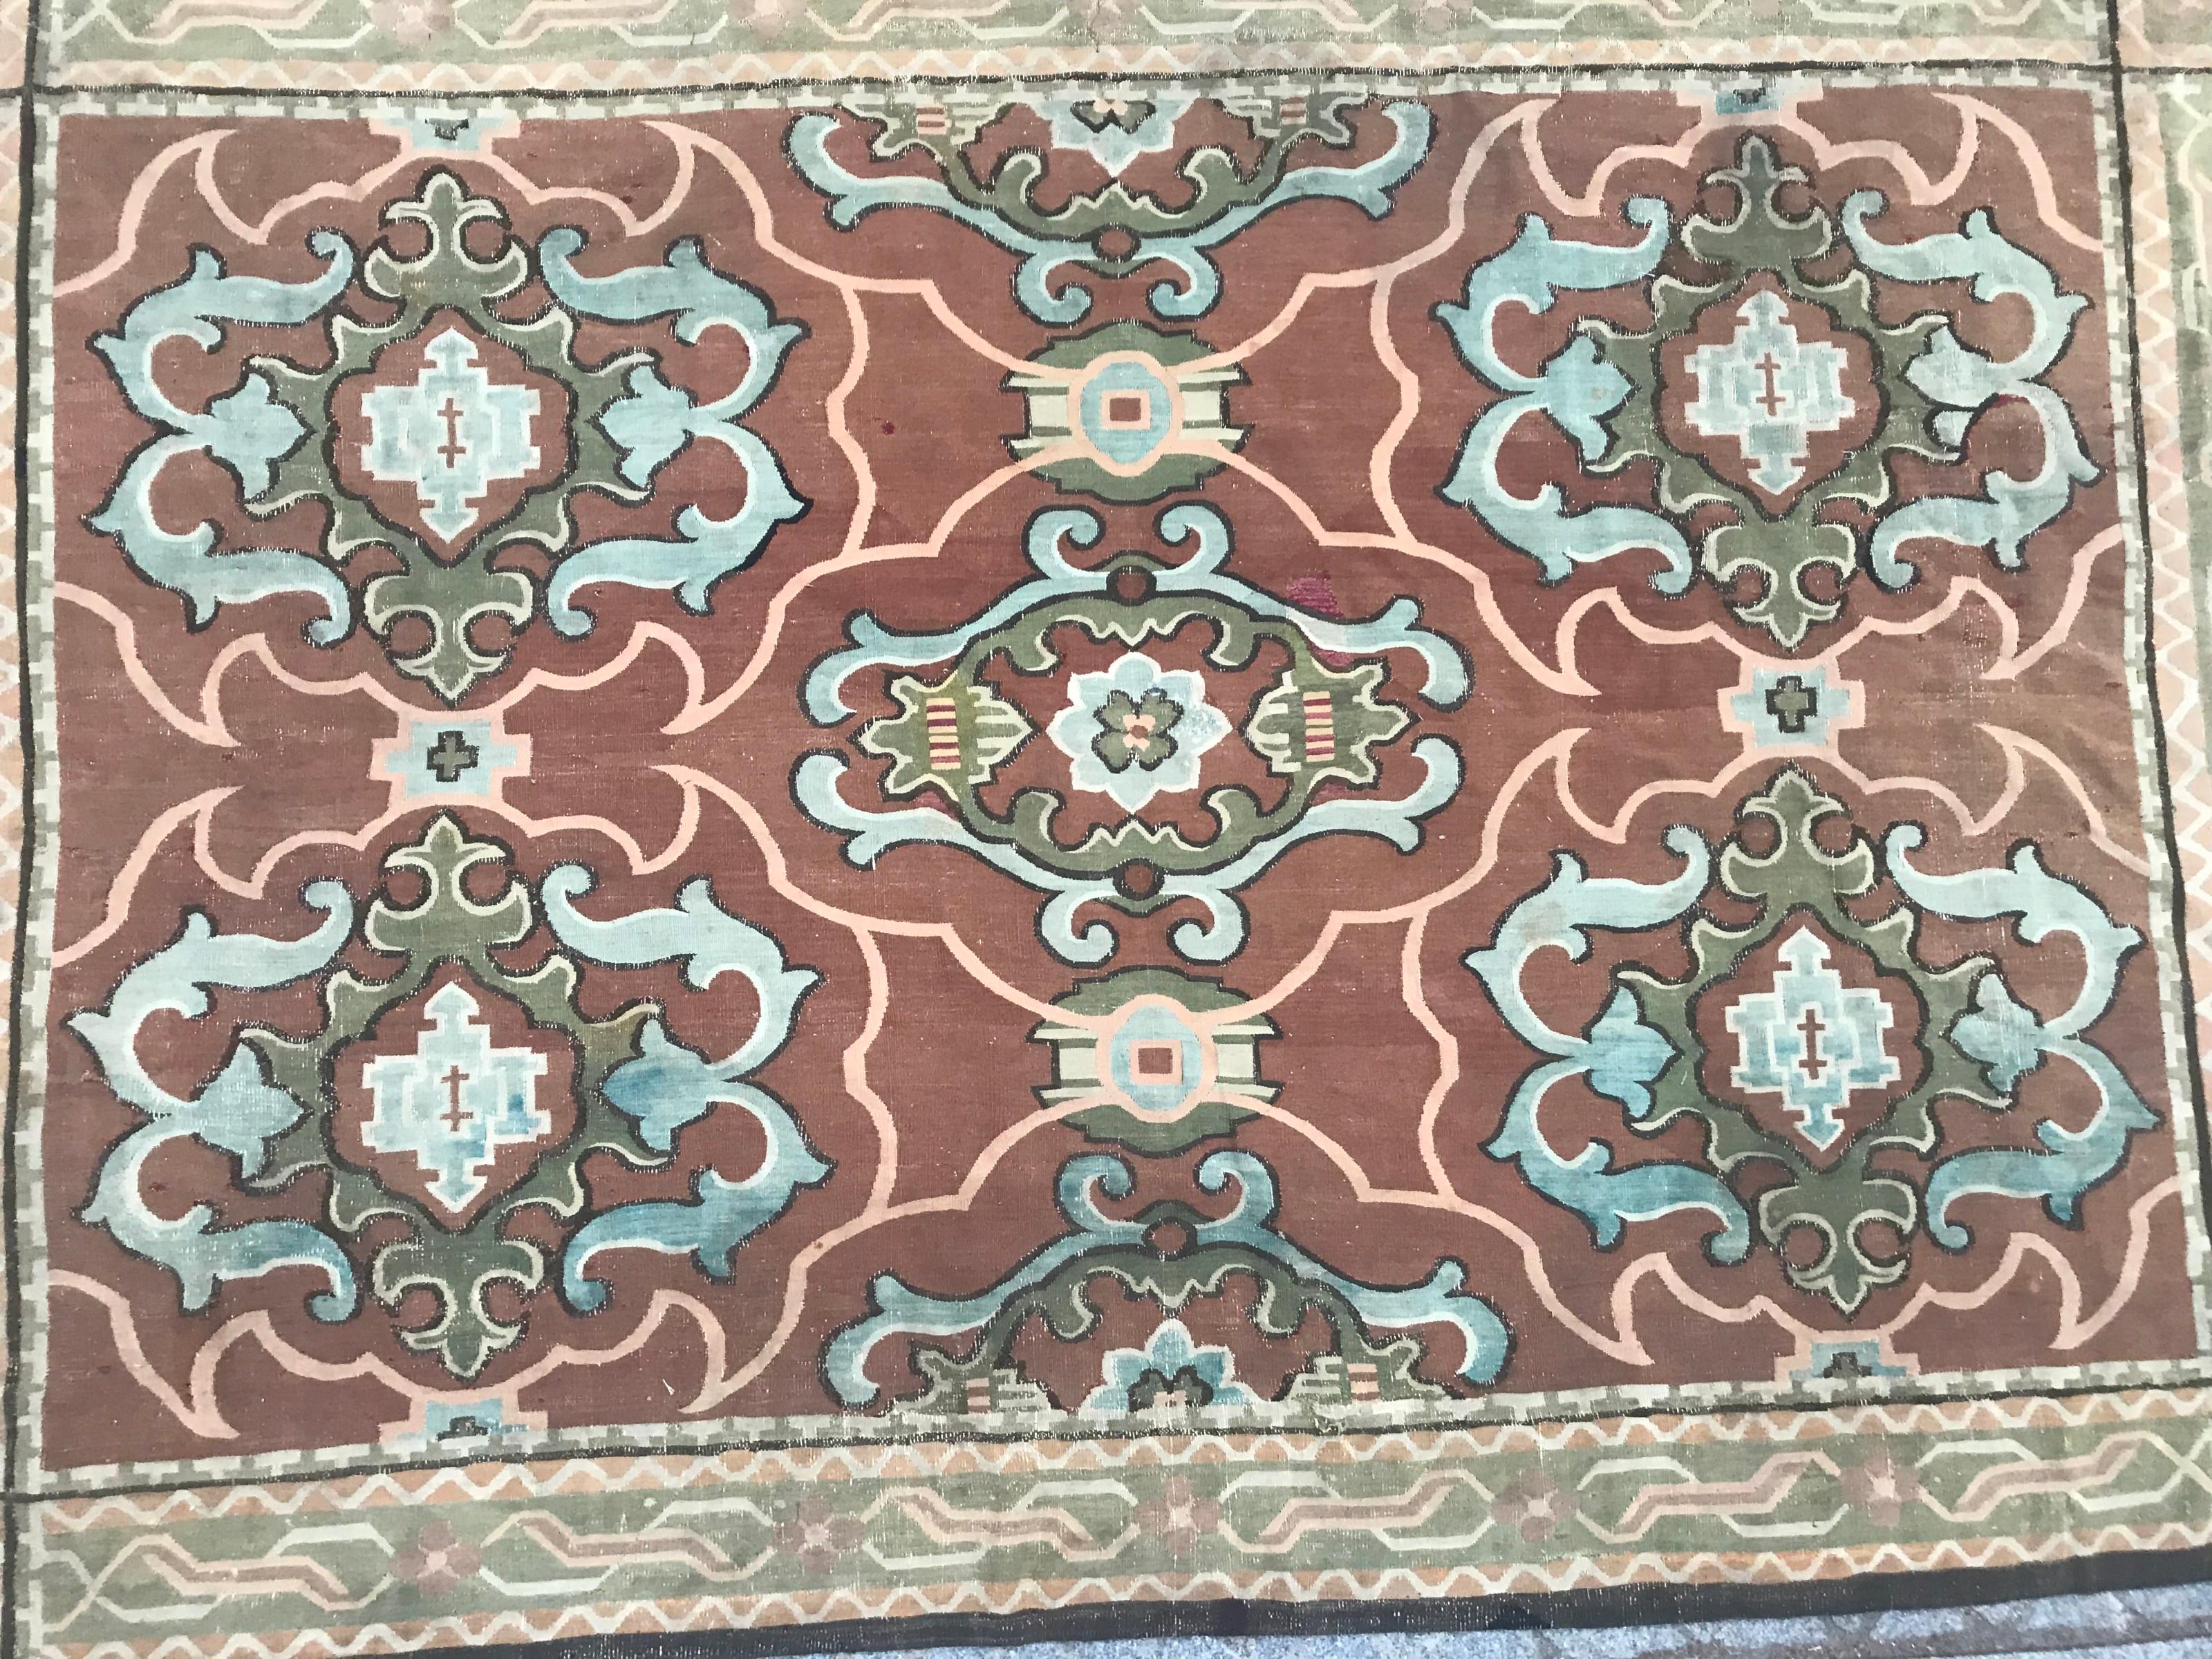 Beautiful 19th century French Aubusson rug with beautiful decorative design French Louis the XIV style, and natural colors with brown, green and blue, entirely handwoven with wool on cotton foundation.

✨✨✨
